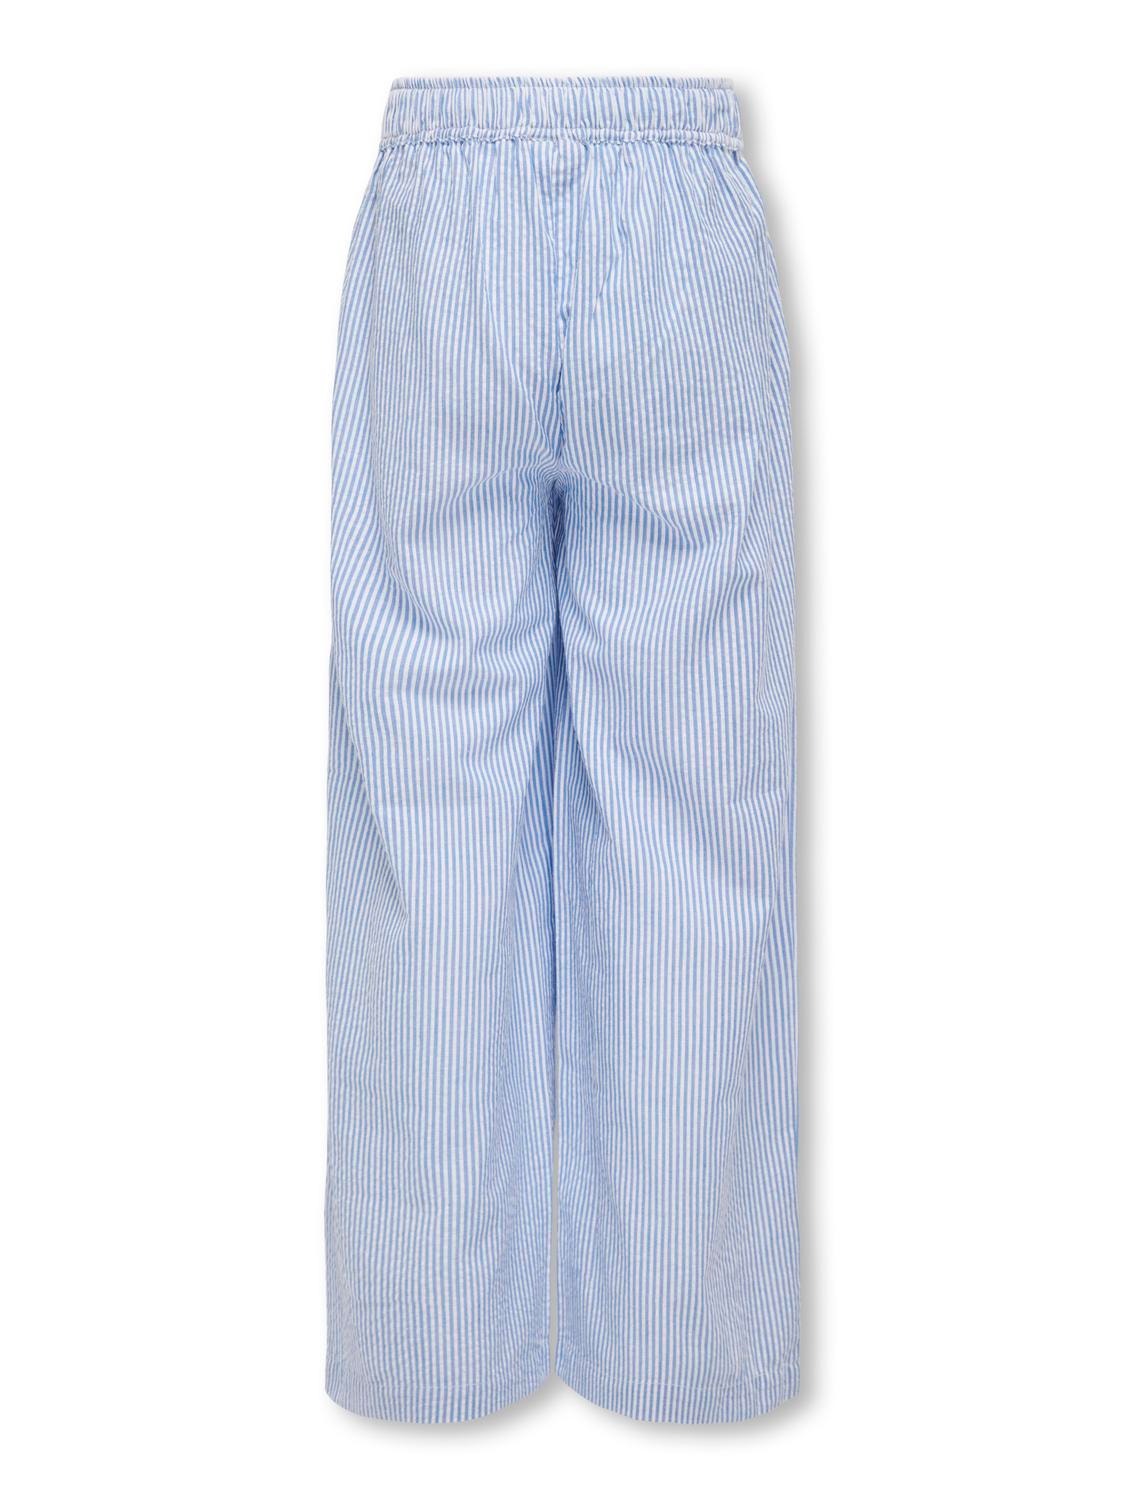 ONLY Straight Fit Trousers -Cloud Dancer - 15320449